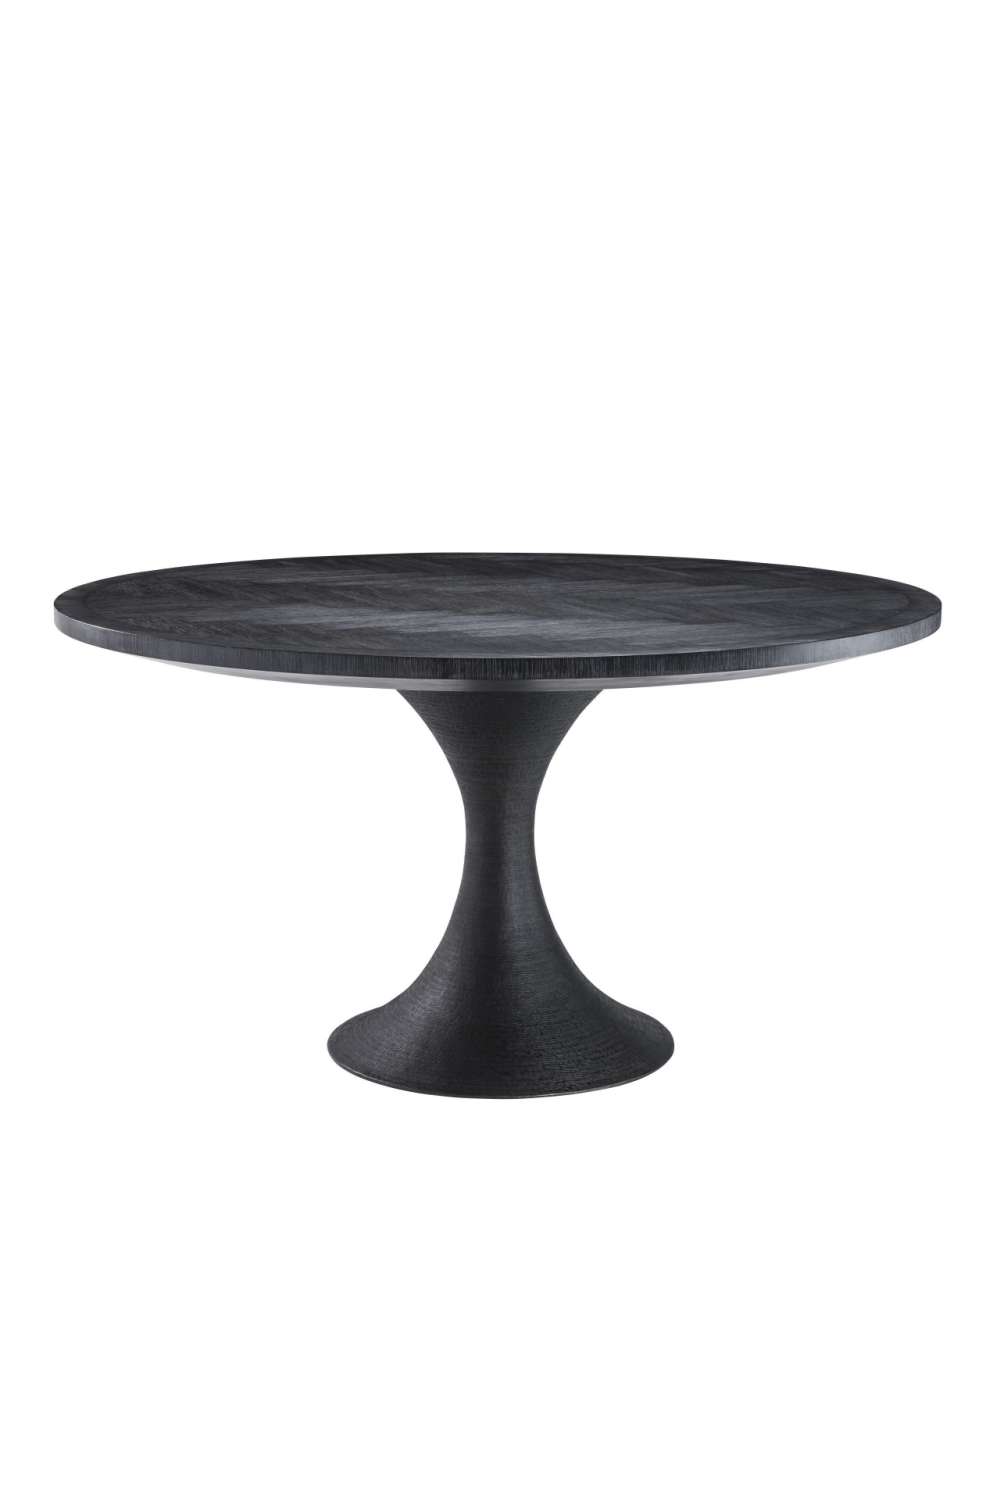 Round Charcoal Dining Table | Eichholtz Melchior | Woodfurniture.com